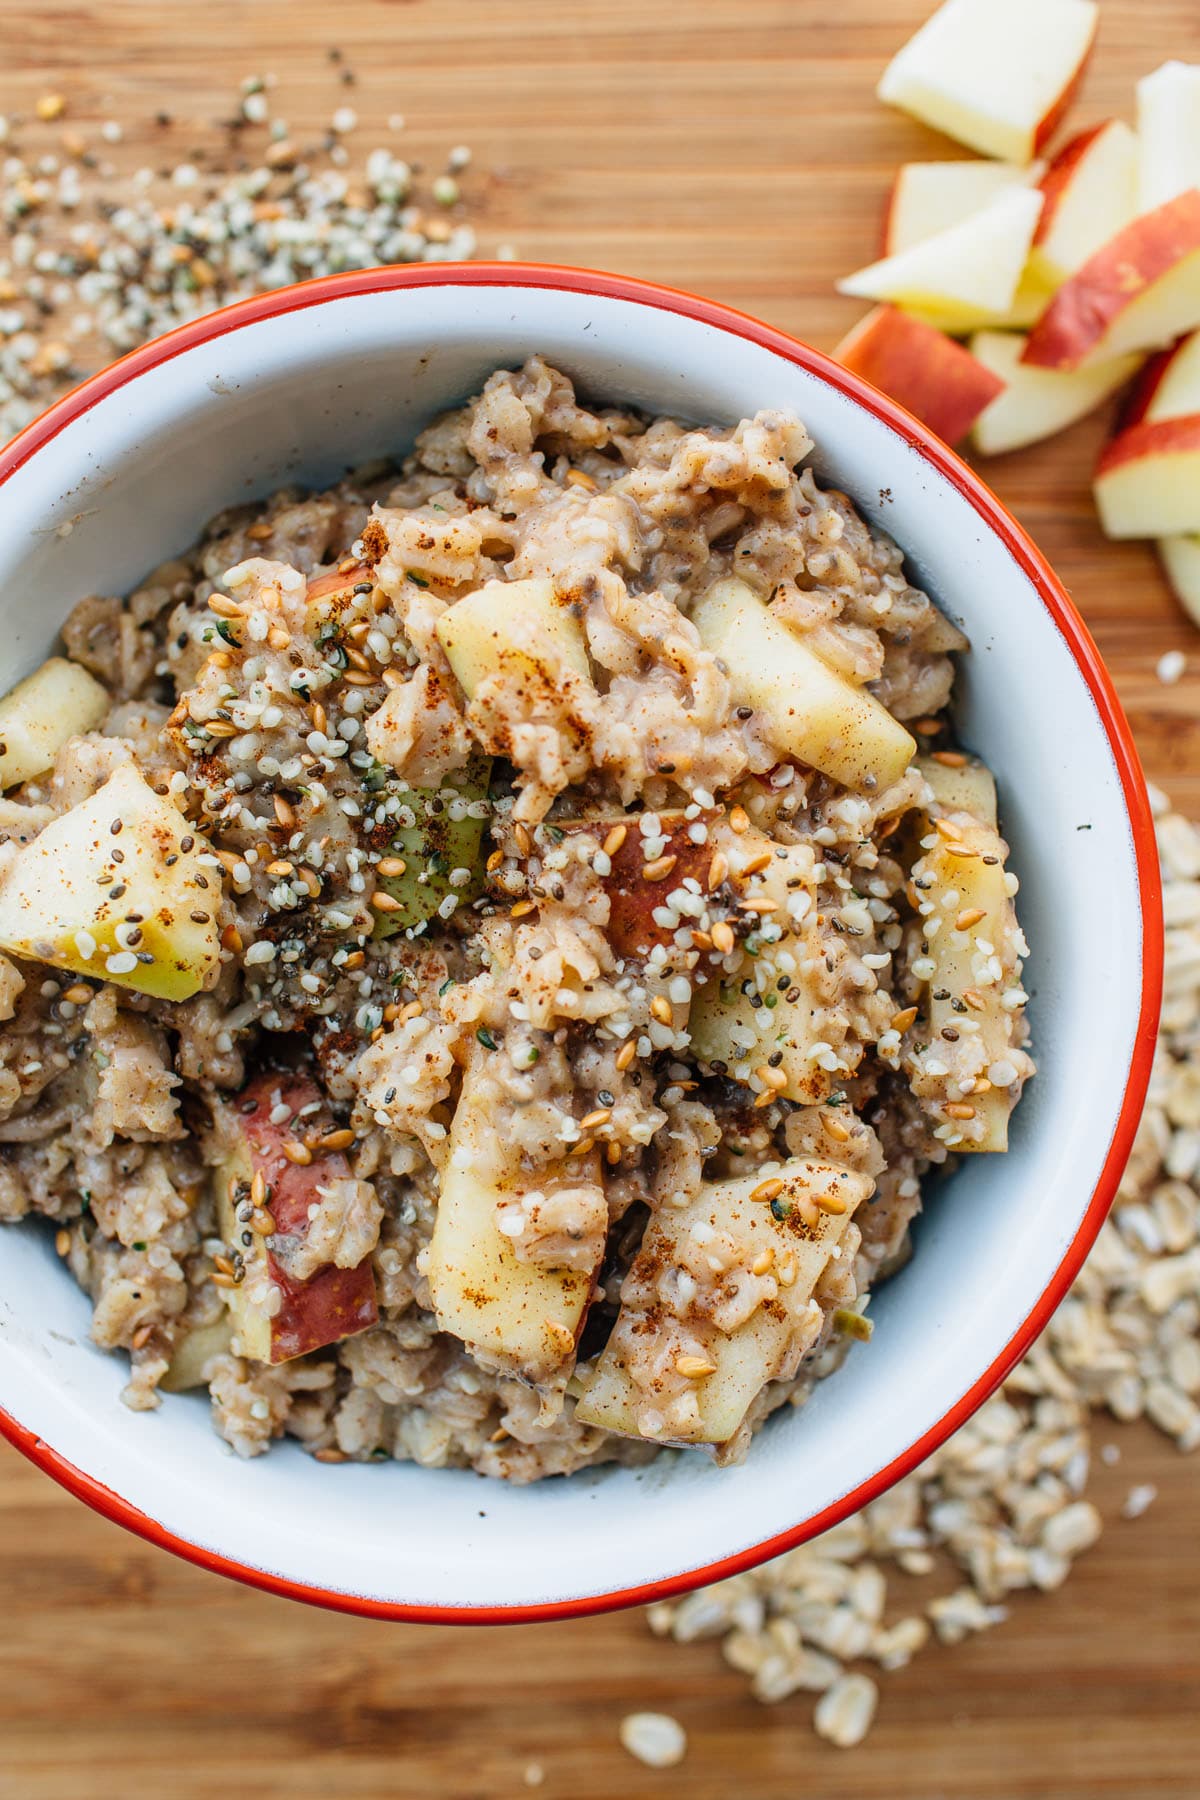 Apple spiced oatmeal and seeds in a white and red camping bowl.